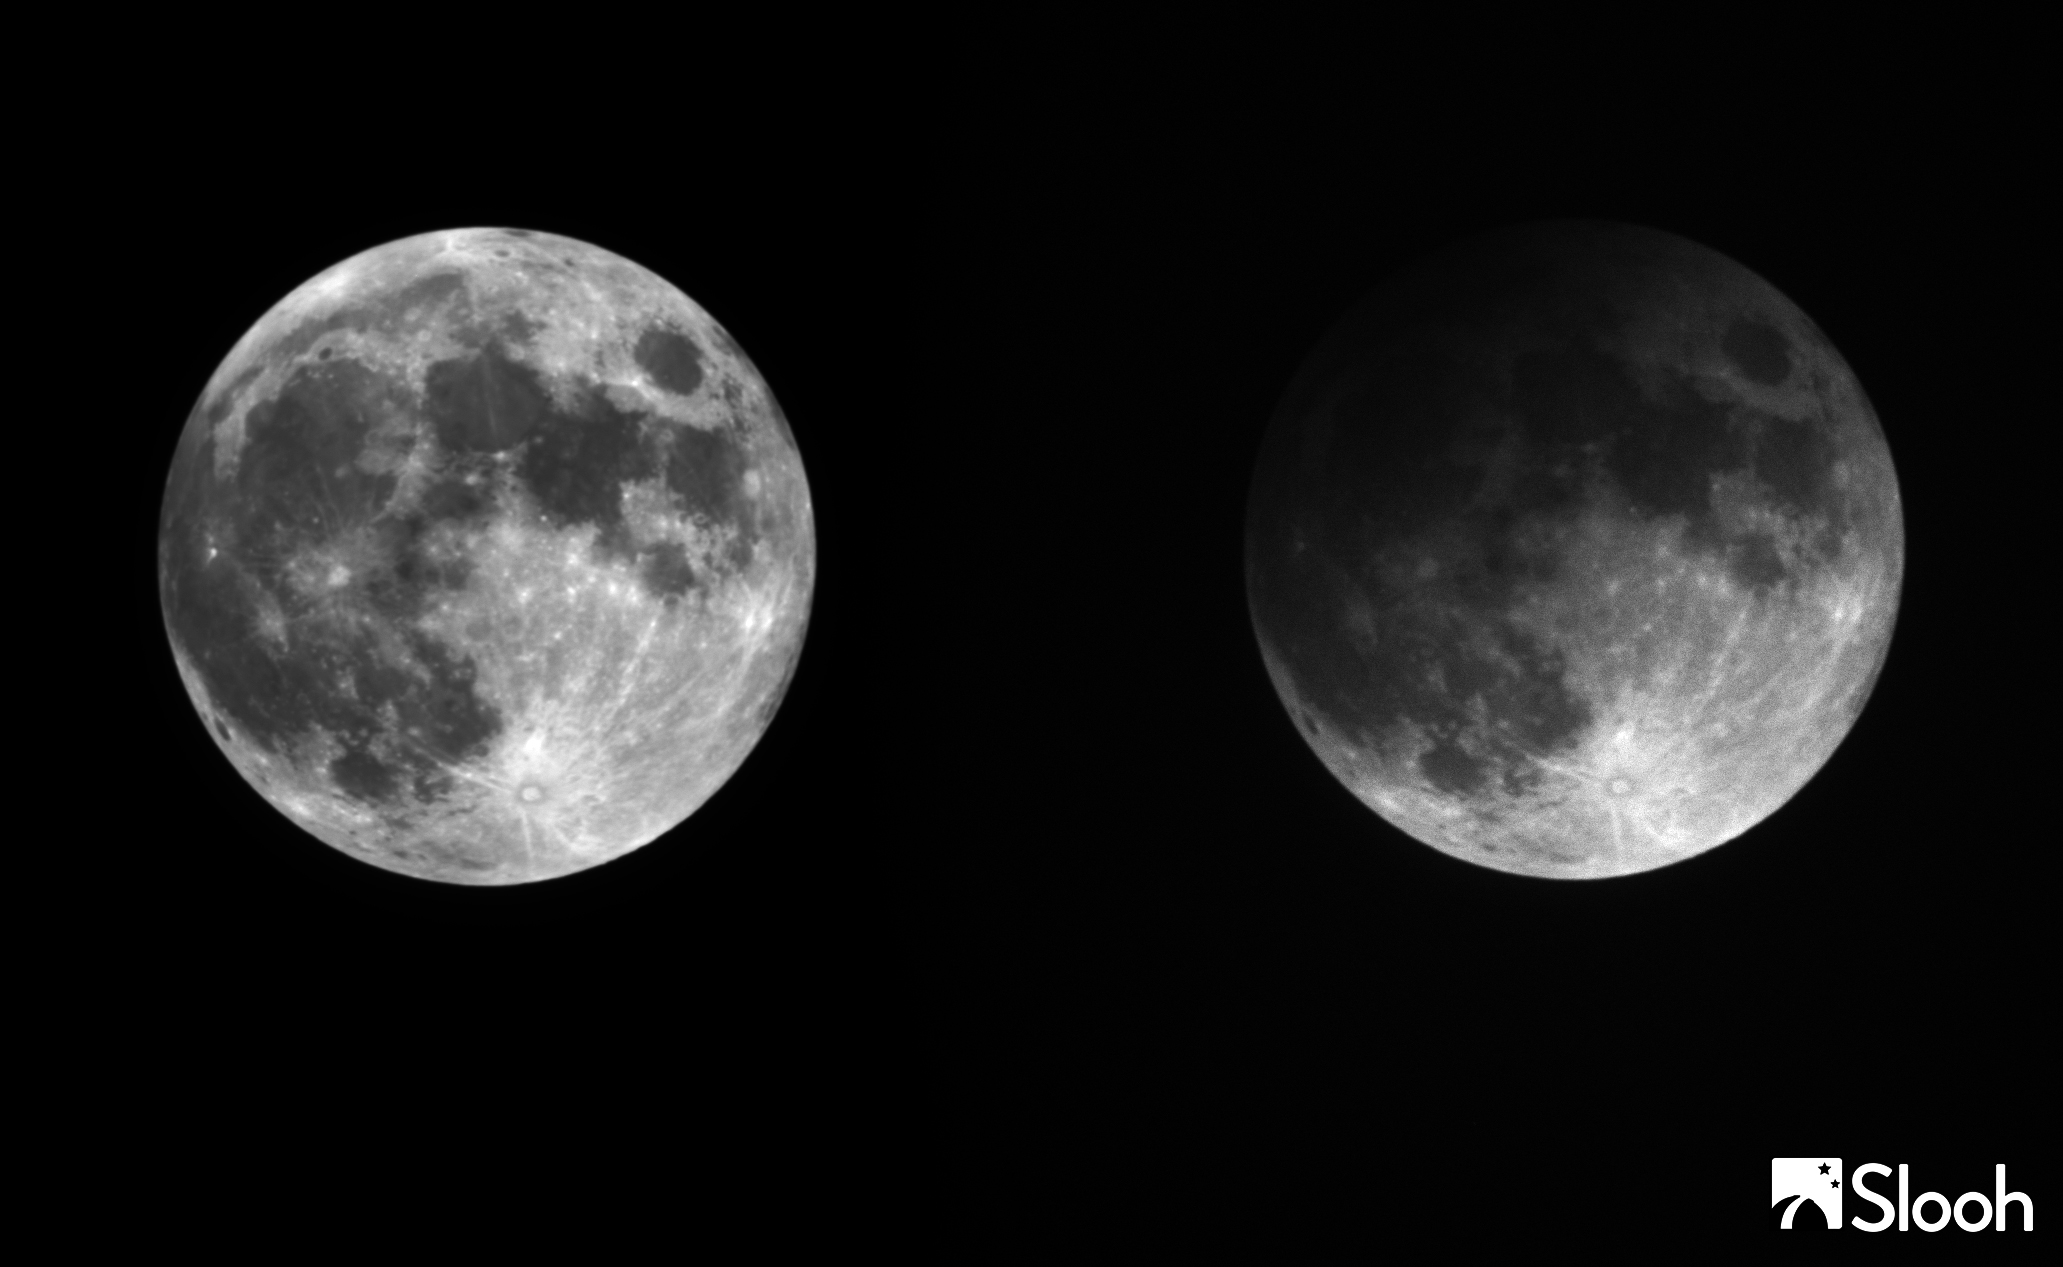 This comparison image of the Snow Moon penumbral lunar eclipse captured by the Slooh Community Observatory on Feb. 10, 2017 shows how much of the moon was darkened during the relatively minor eclipse. The image was taken by a Slooh.com telescope in Spain's Canary Islands.